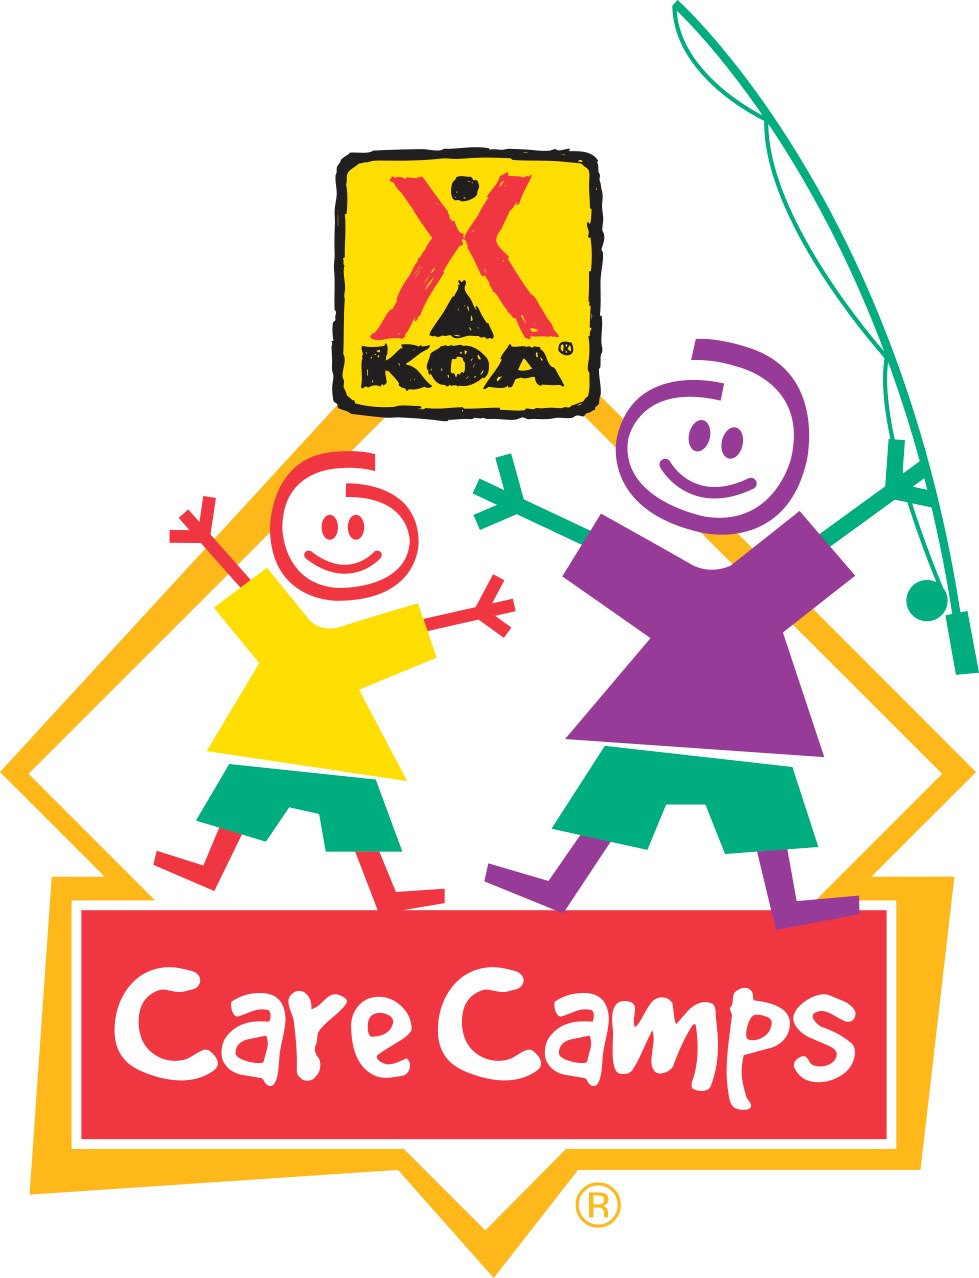 Cards for Care Camps